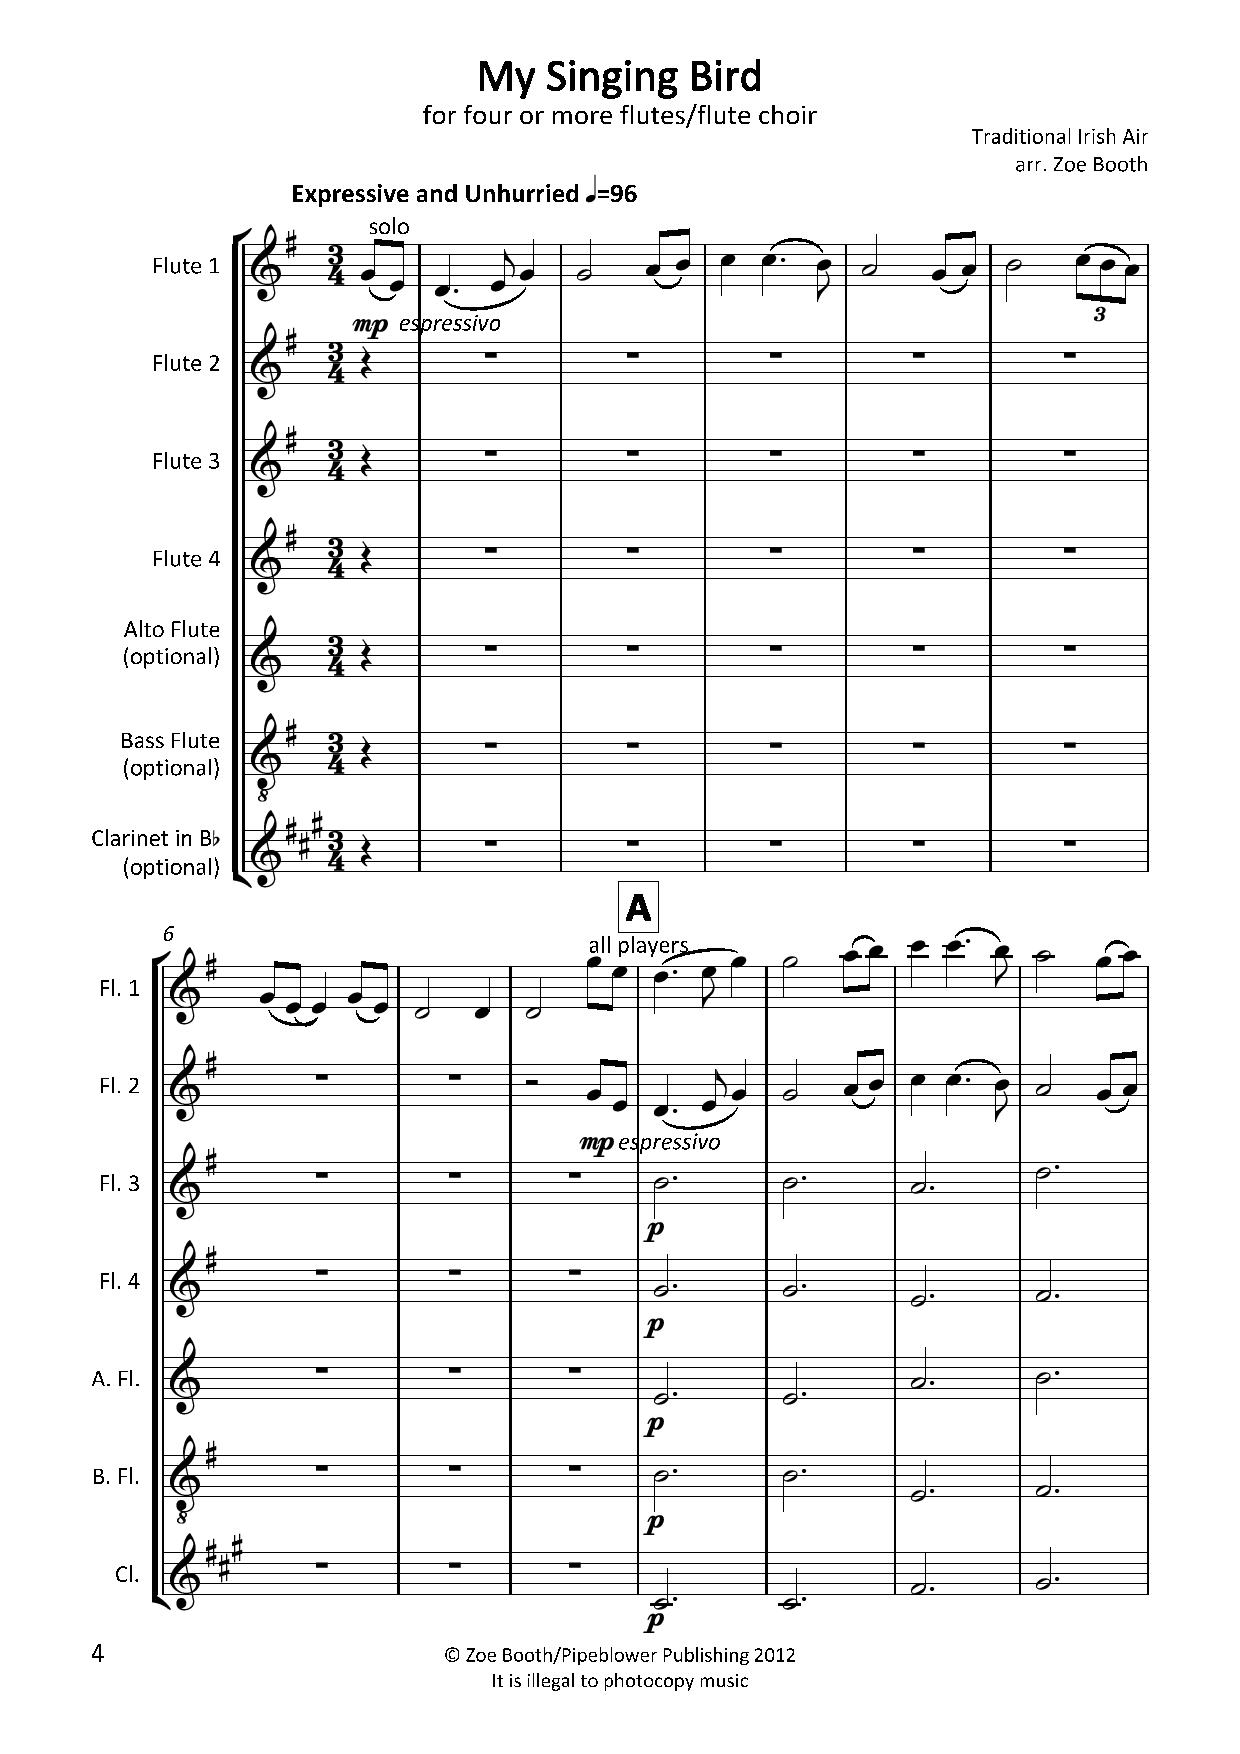 Irish Traditional Air and Jig,  arranged by Zoë Booth for four or more flutes/flute choir